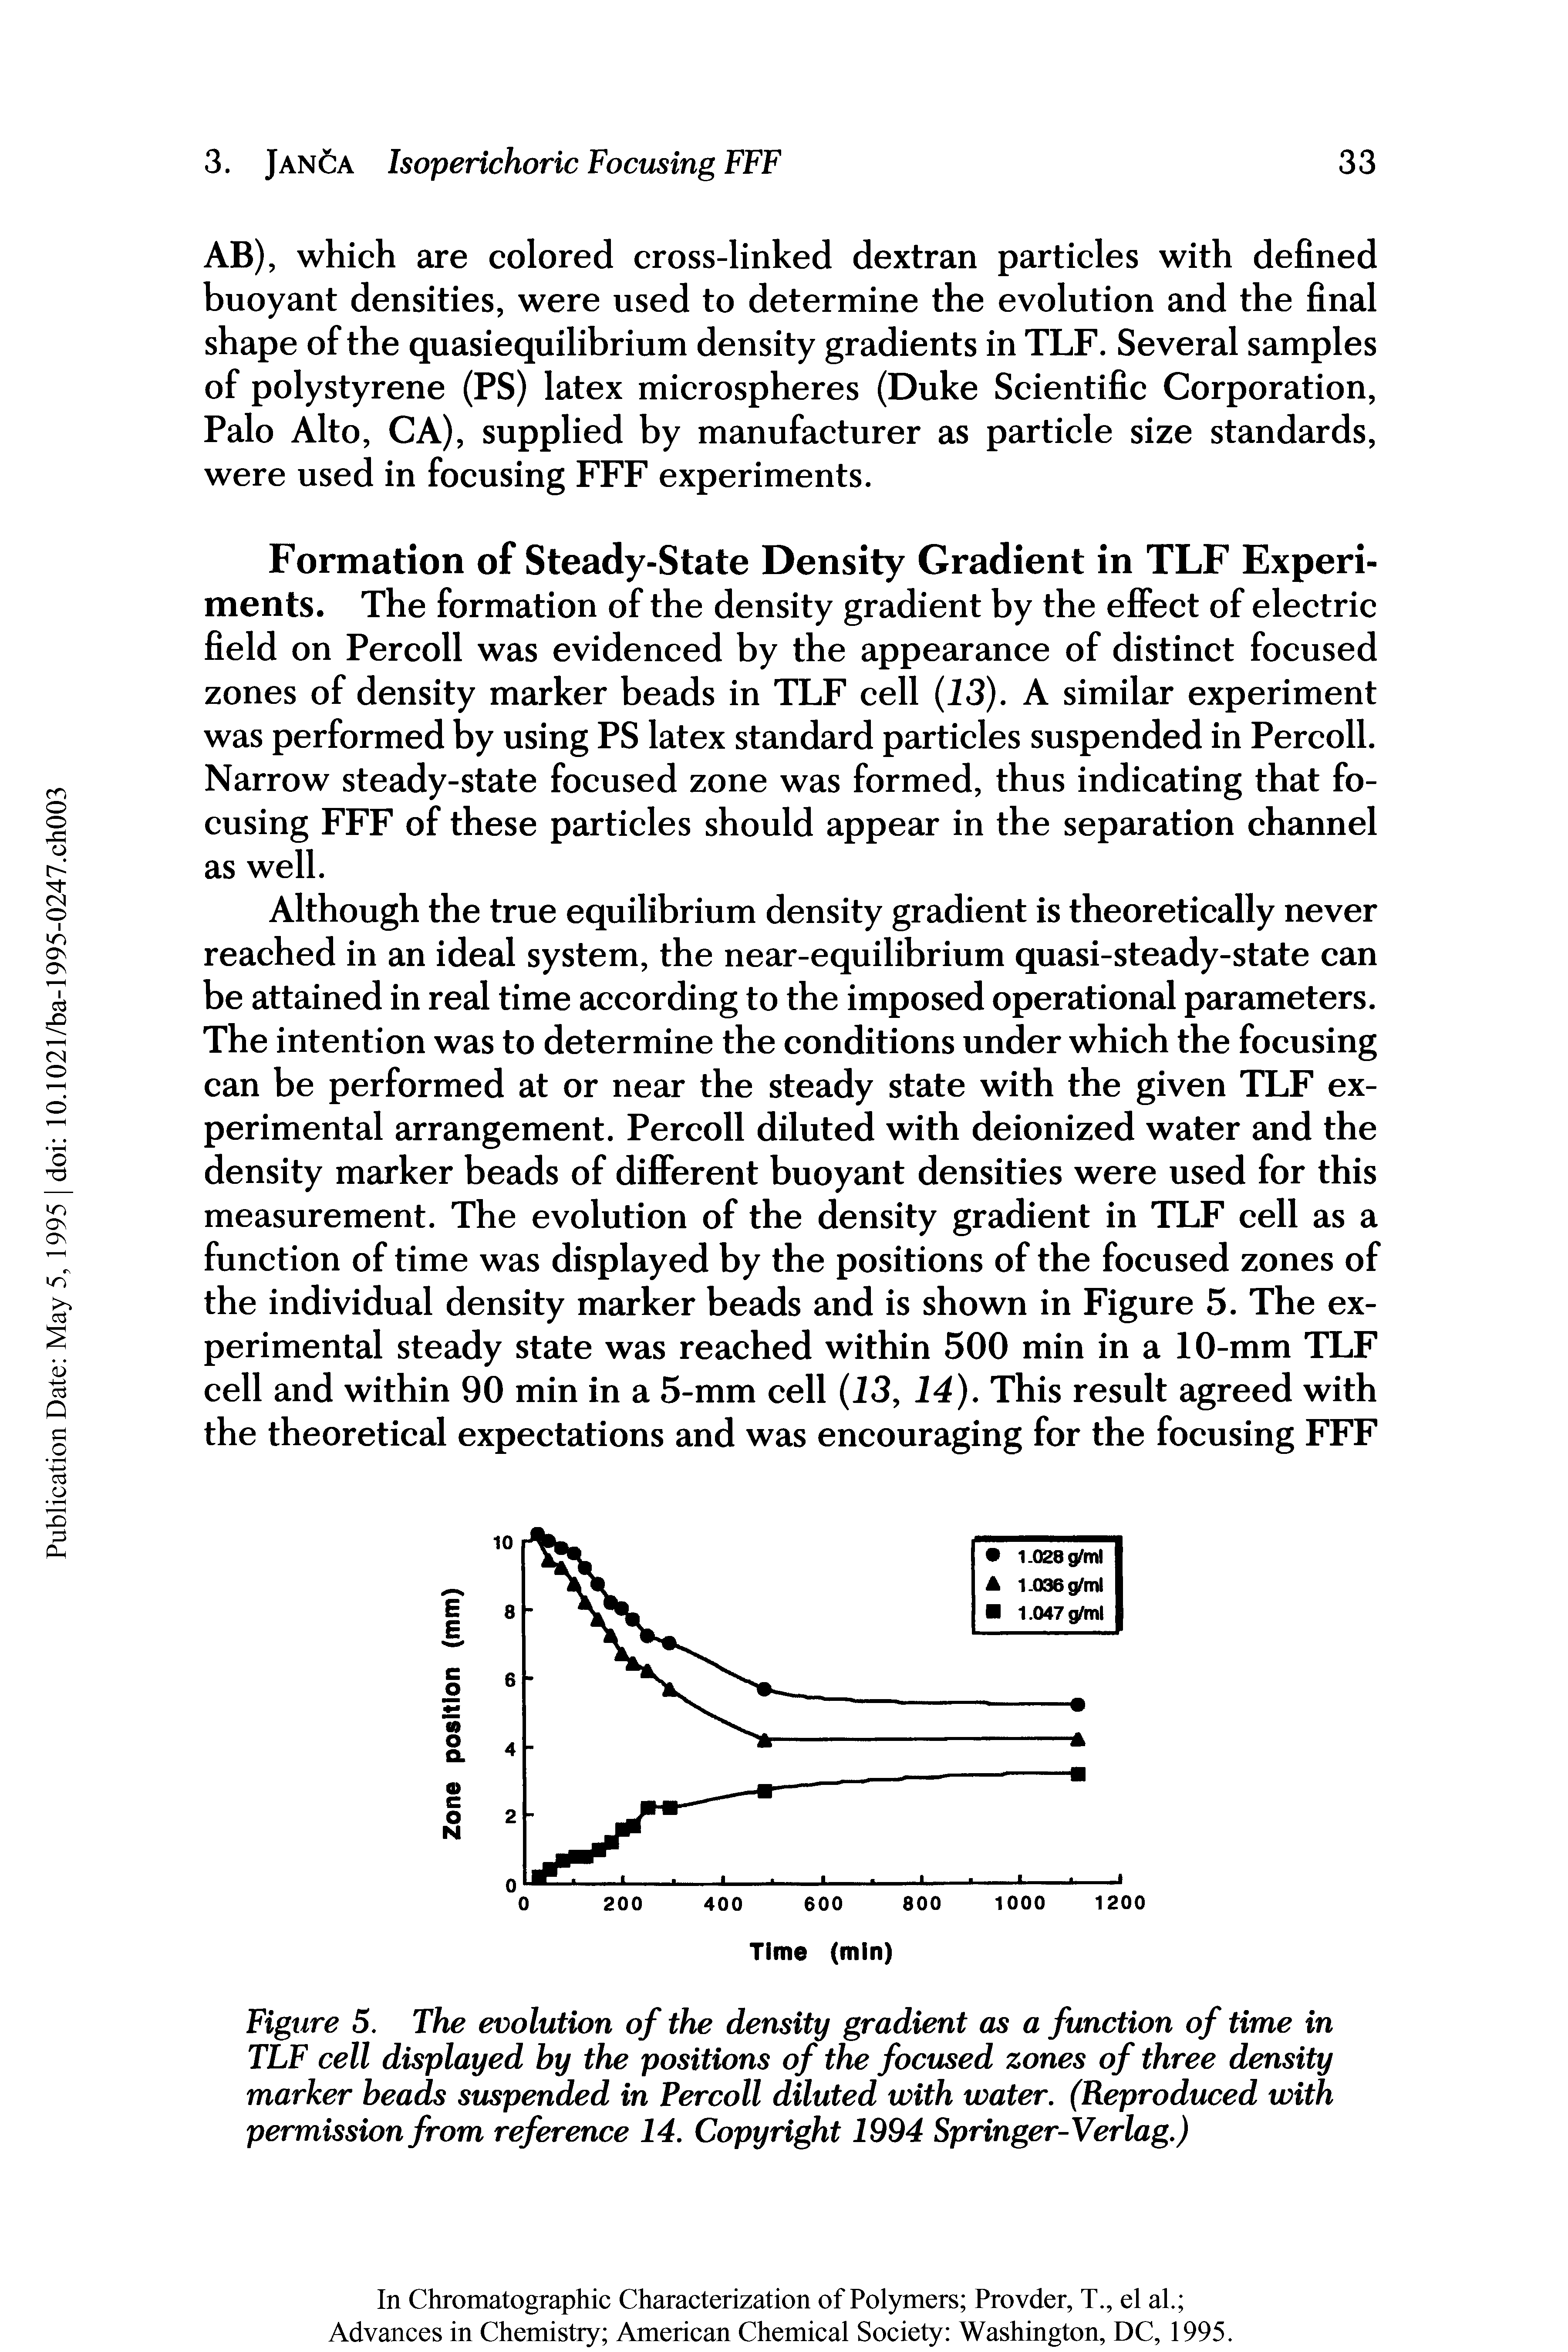 Figure 5. The evolution of the density gradient as a function of time in TLF cell displayed by the positions of the focused zones of three density marker beads suspended in Percoll diluted with water. (Reproduced with permission from reference 14. Copyright 1994 Springer-Verlag.)...